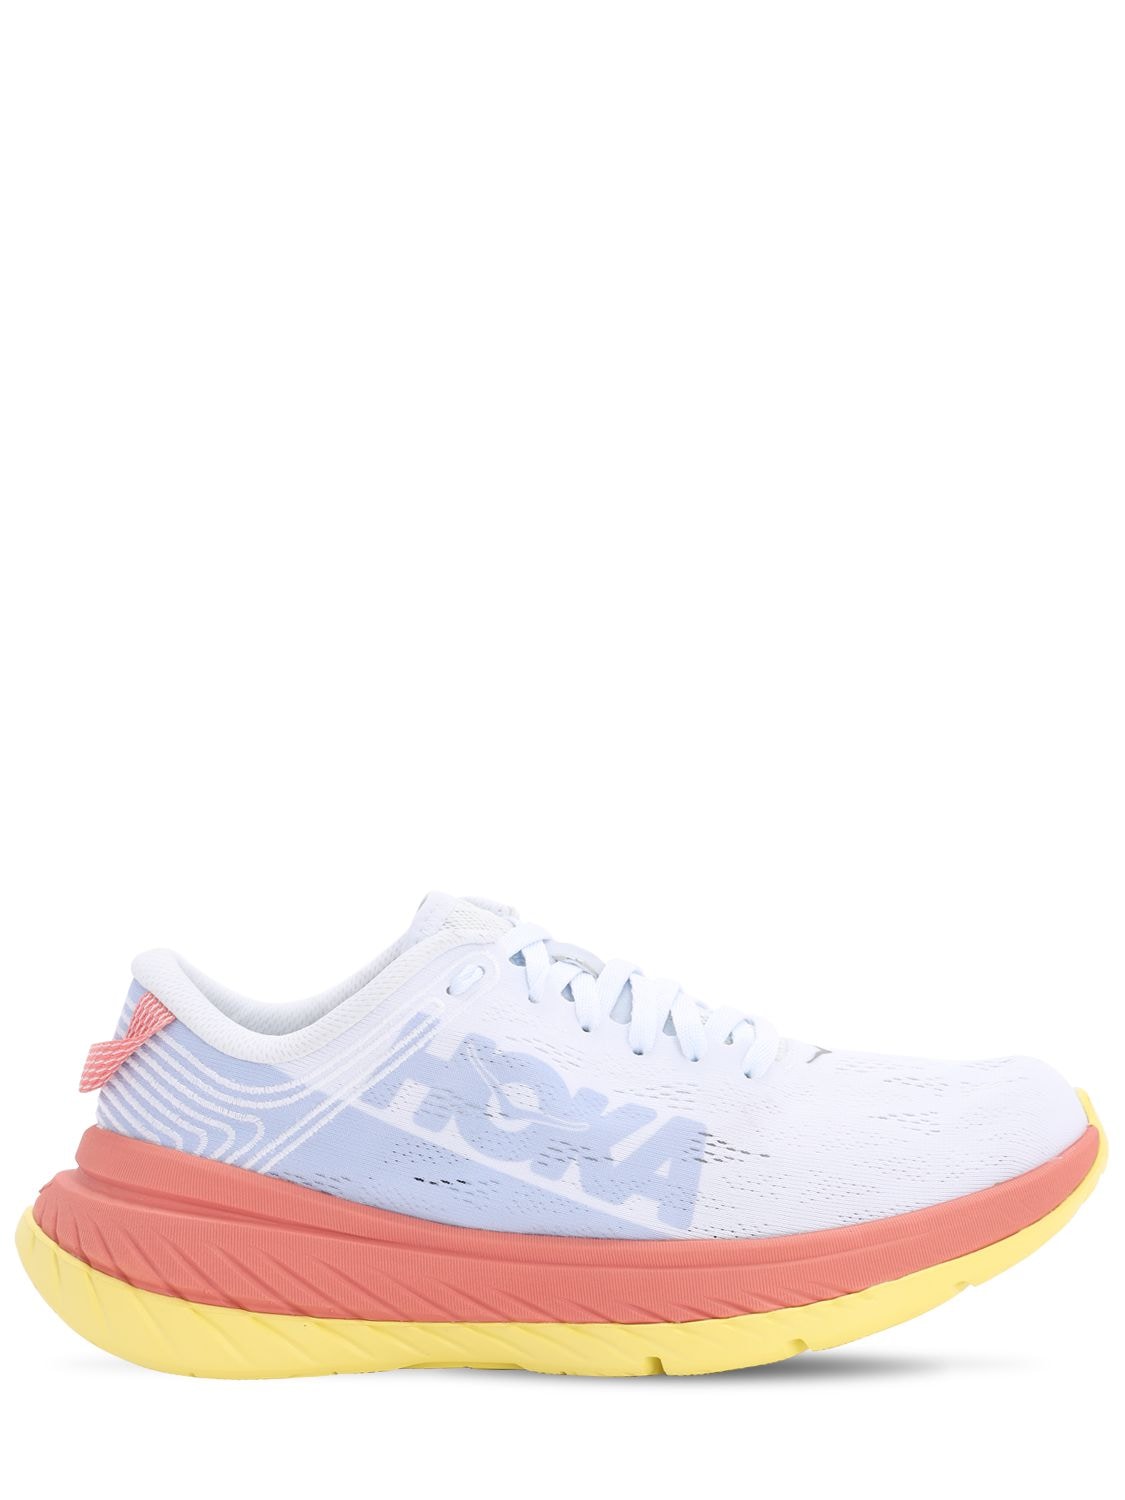 Hoka One One 33mm Carbon X Sneakers In Multicolor